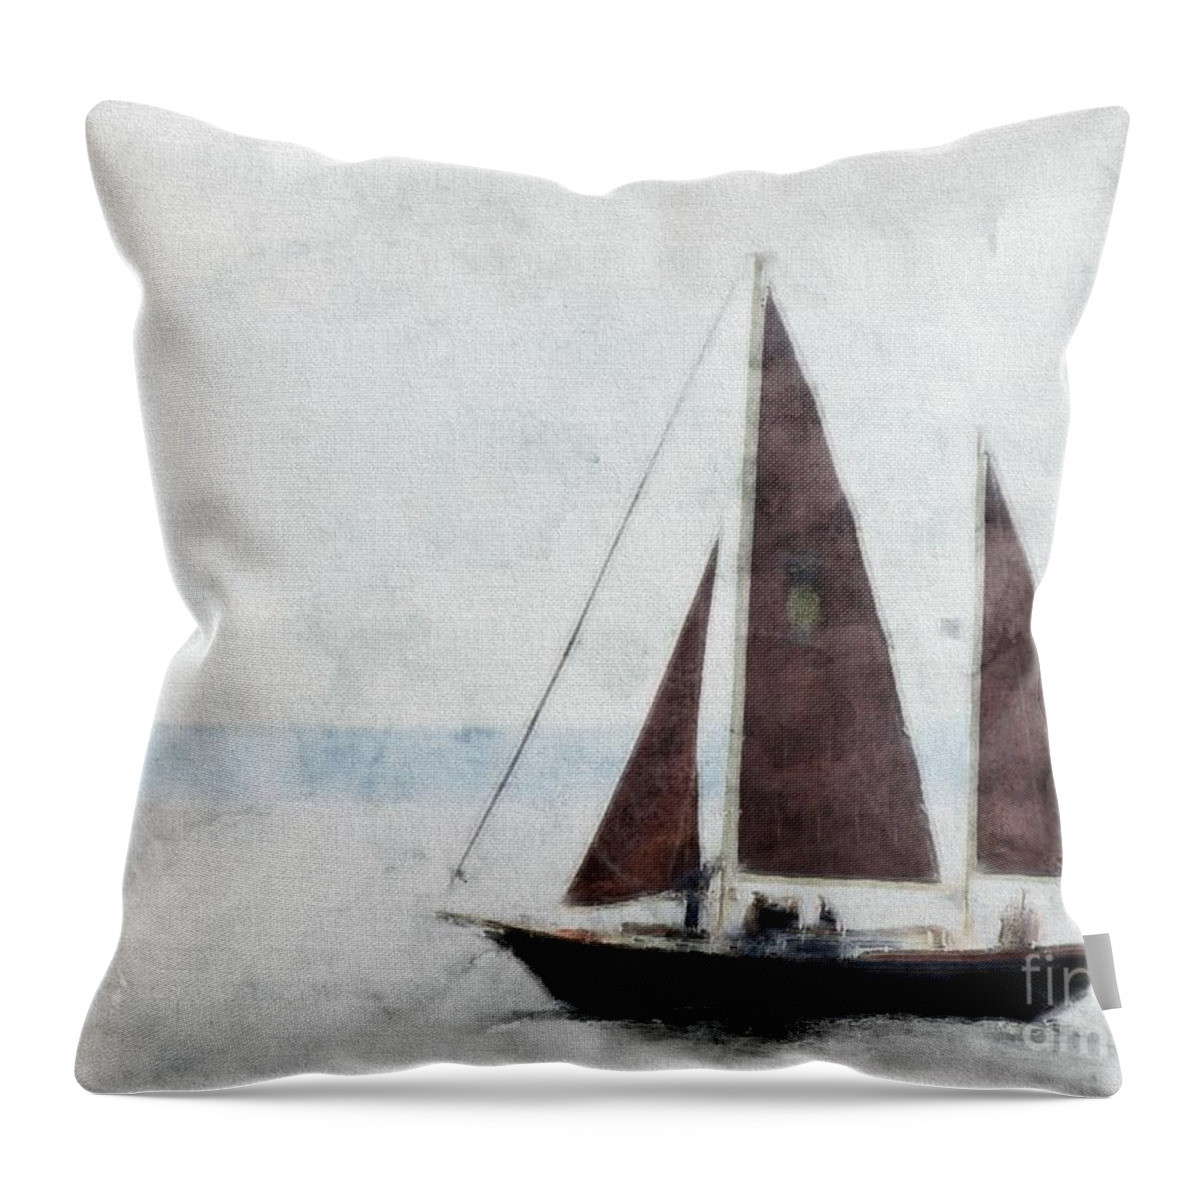 Transportation Throw Pillow featuring the photograph New Adventure by Marcia Lee Jones